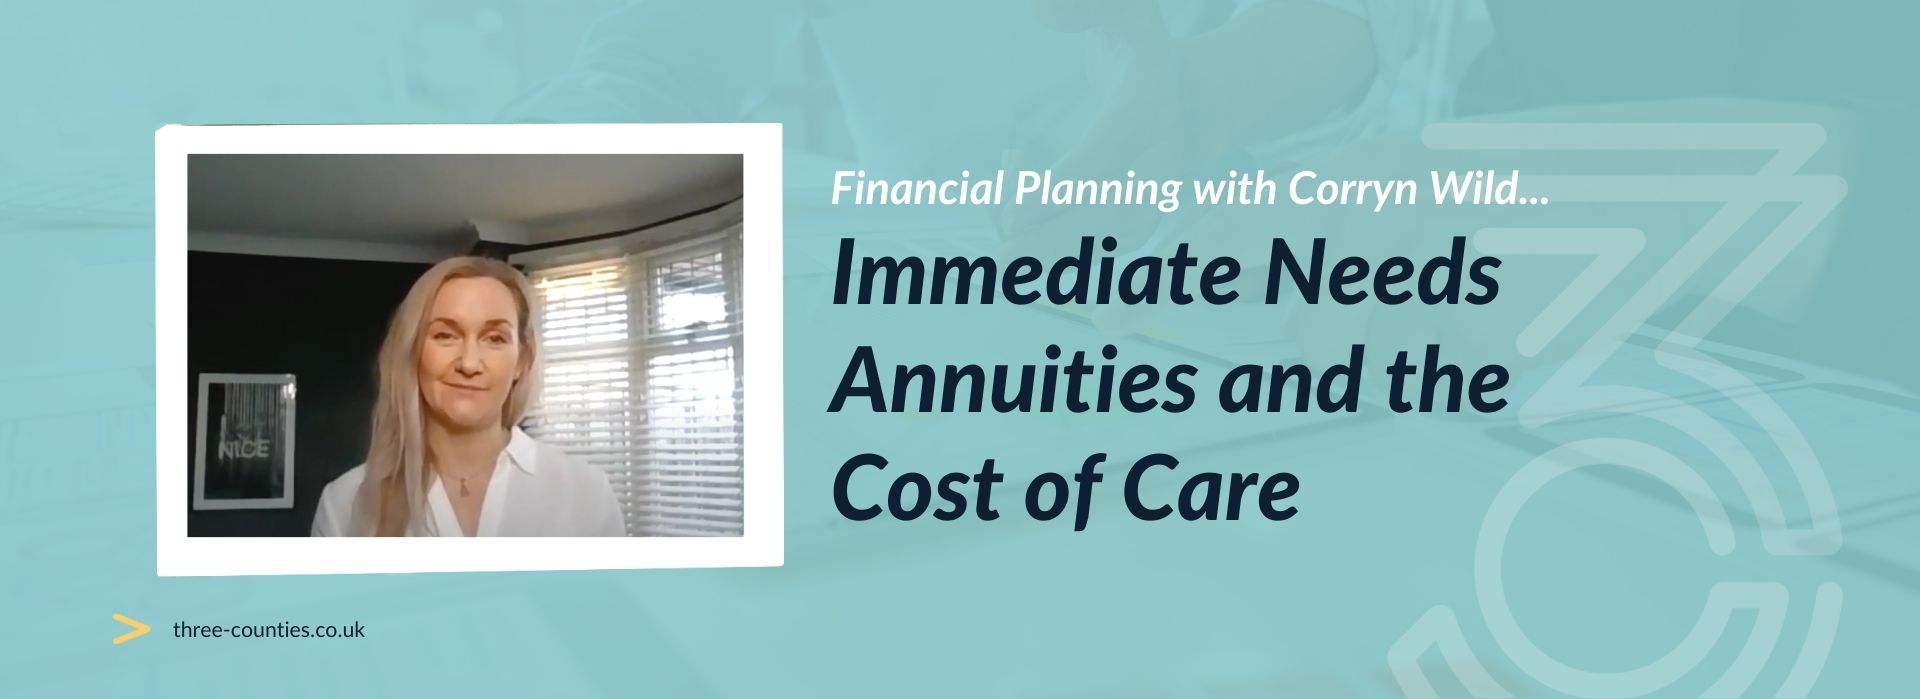 Financial Planning: Immediate Needs Annuities and the Cost of Care